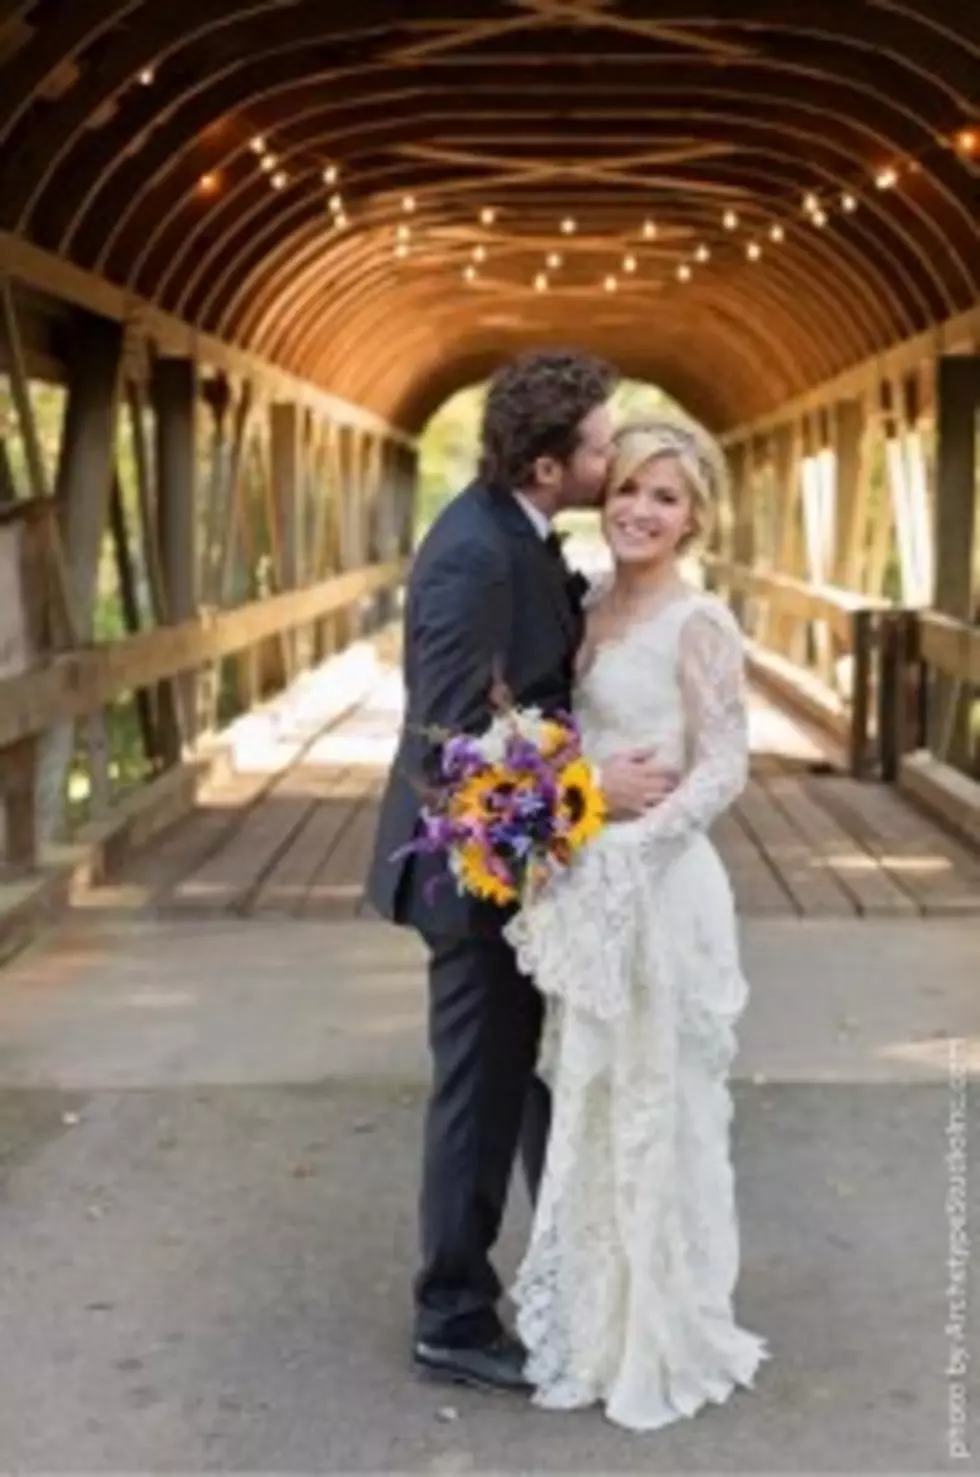 Kelly Clarkson Ties the Knot in Tennesse